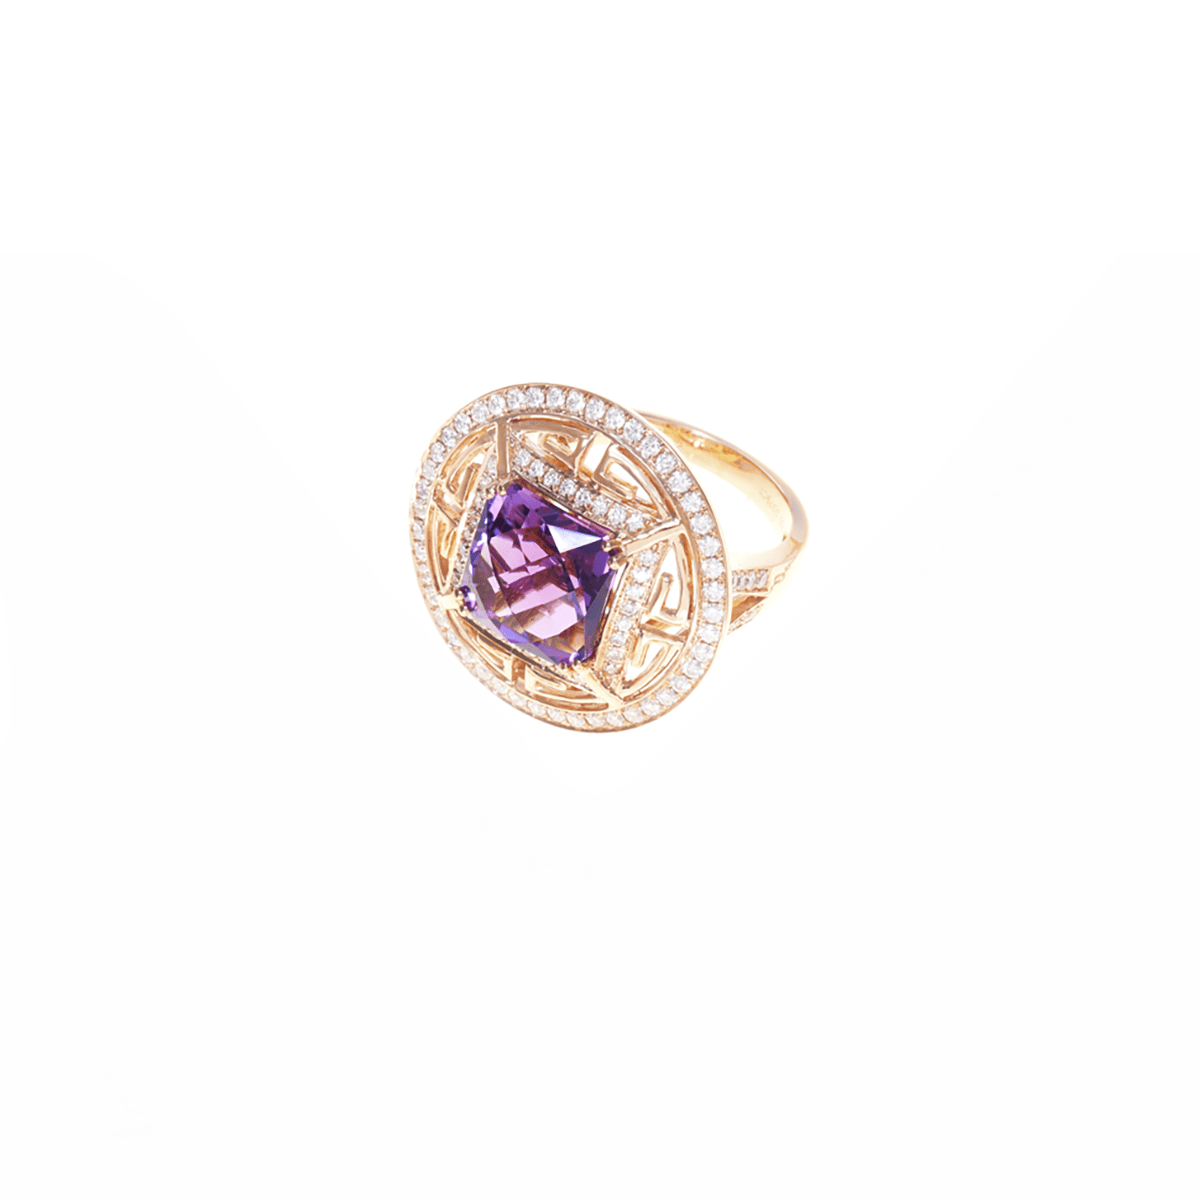 Women’s Ring - Chameleon Ring - Amethyst and Diamonds Ring - RED GOLD®